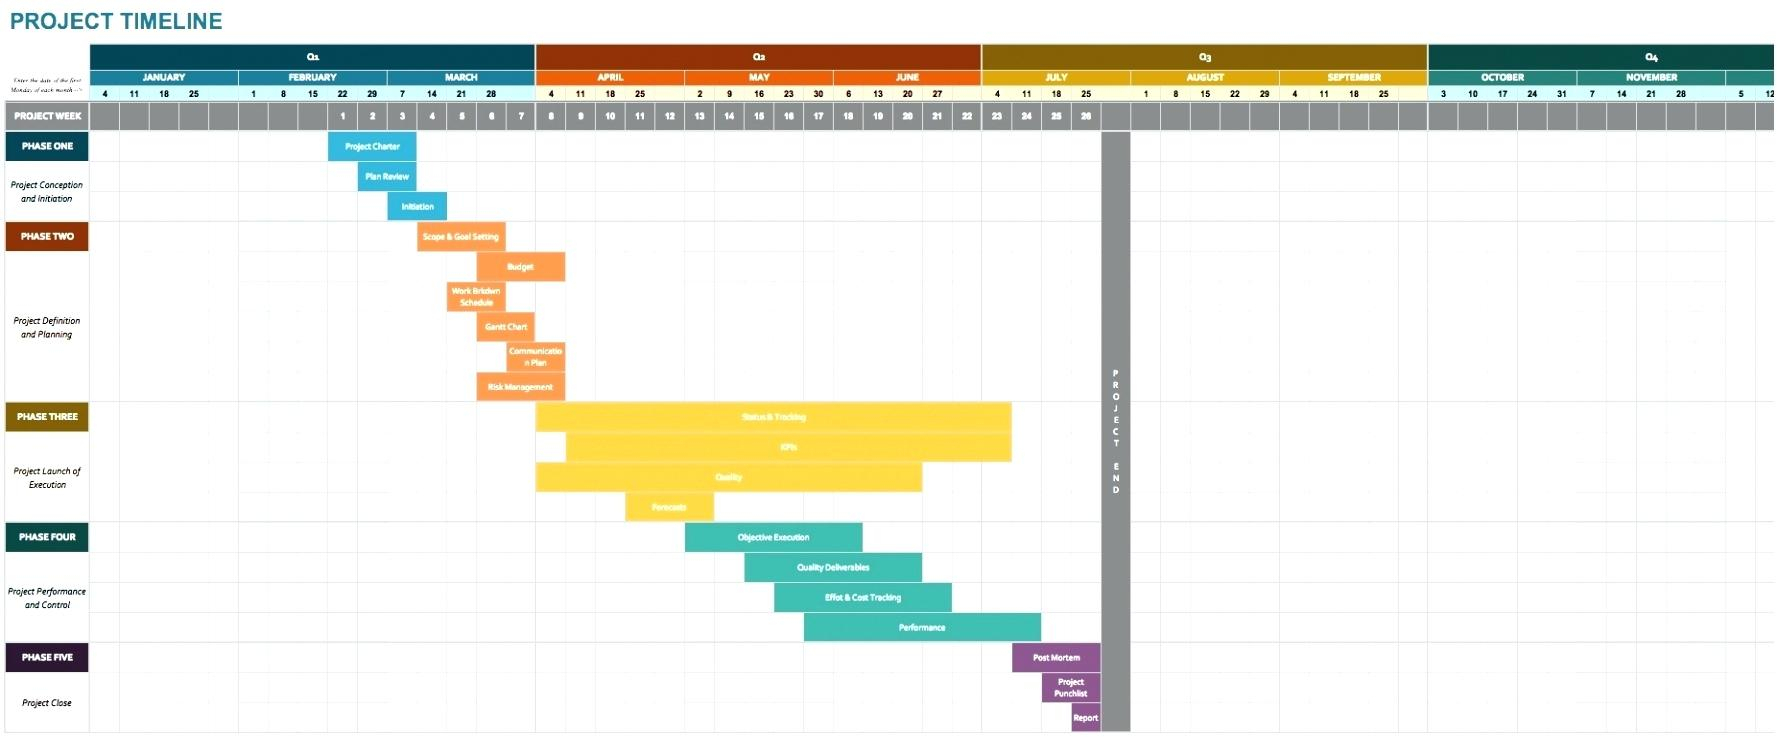 excel-project-timeline-template-free-download-durun-ugrasgrup-and-project-timeline-excel